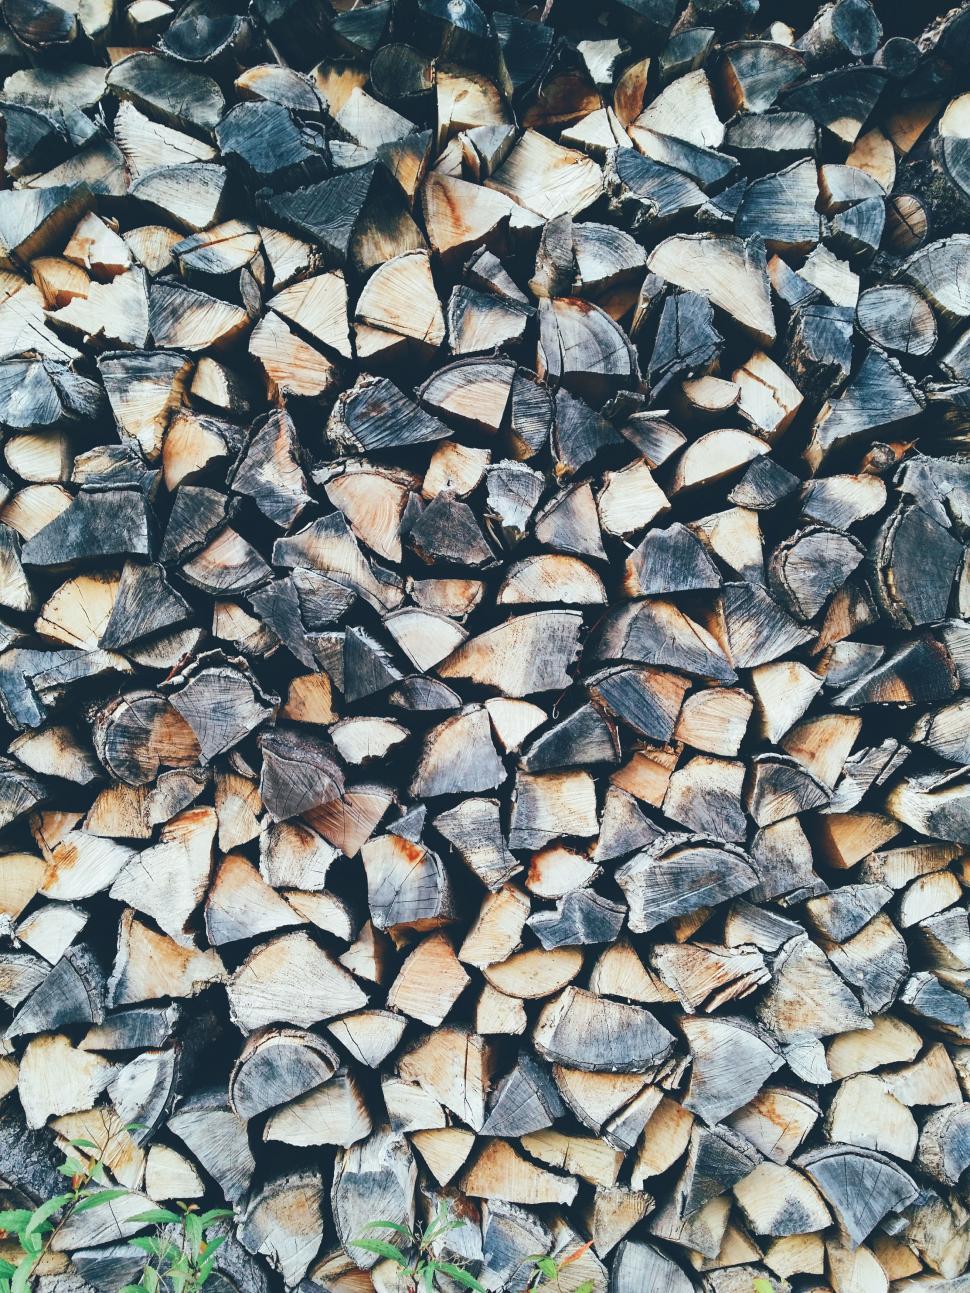 Free Image of Large Pile of Wood Next to Green Field 